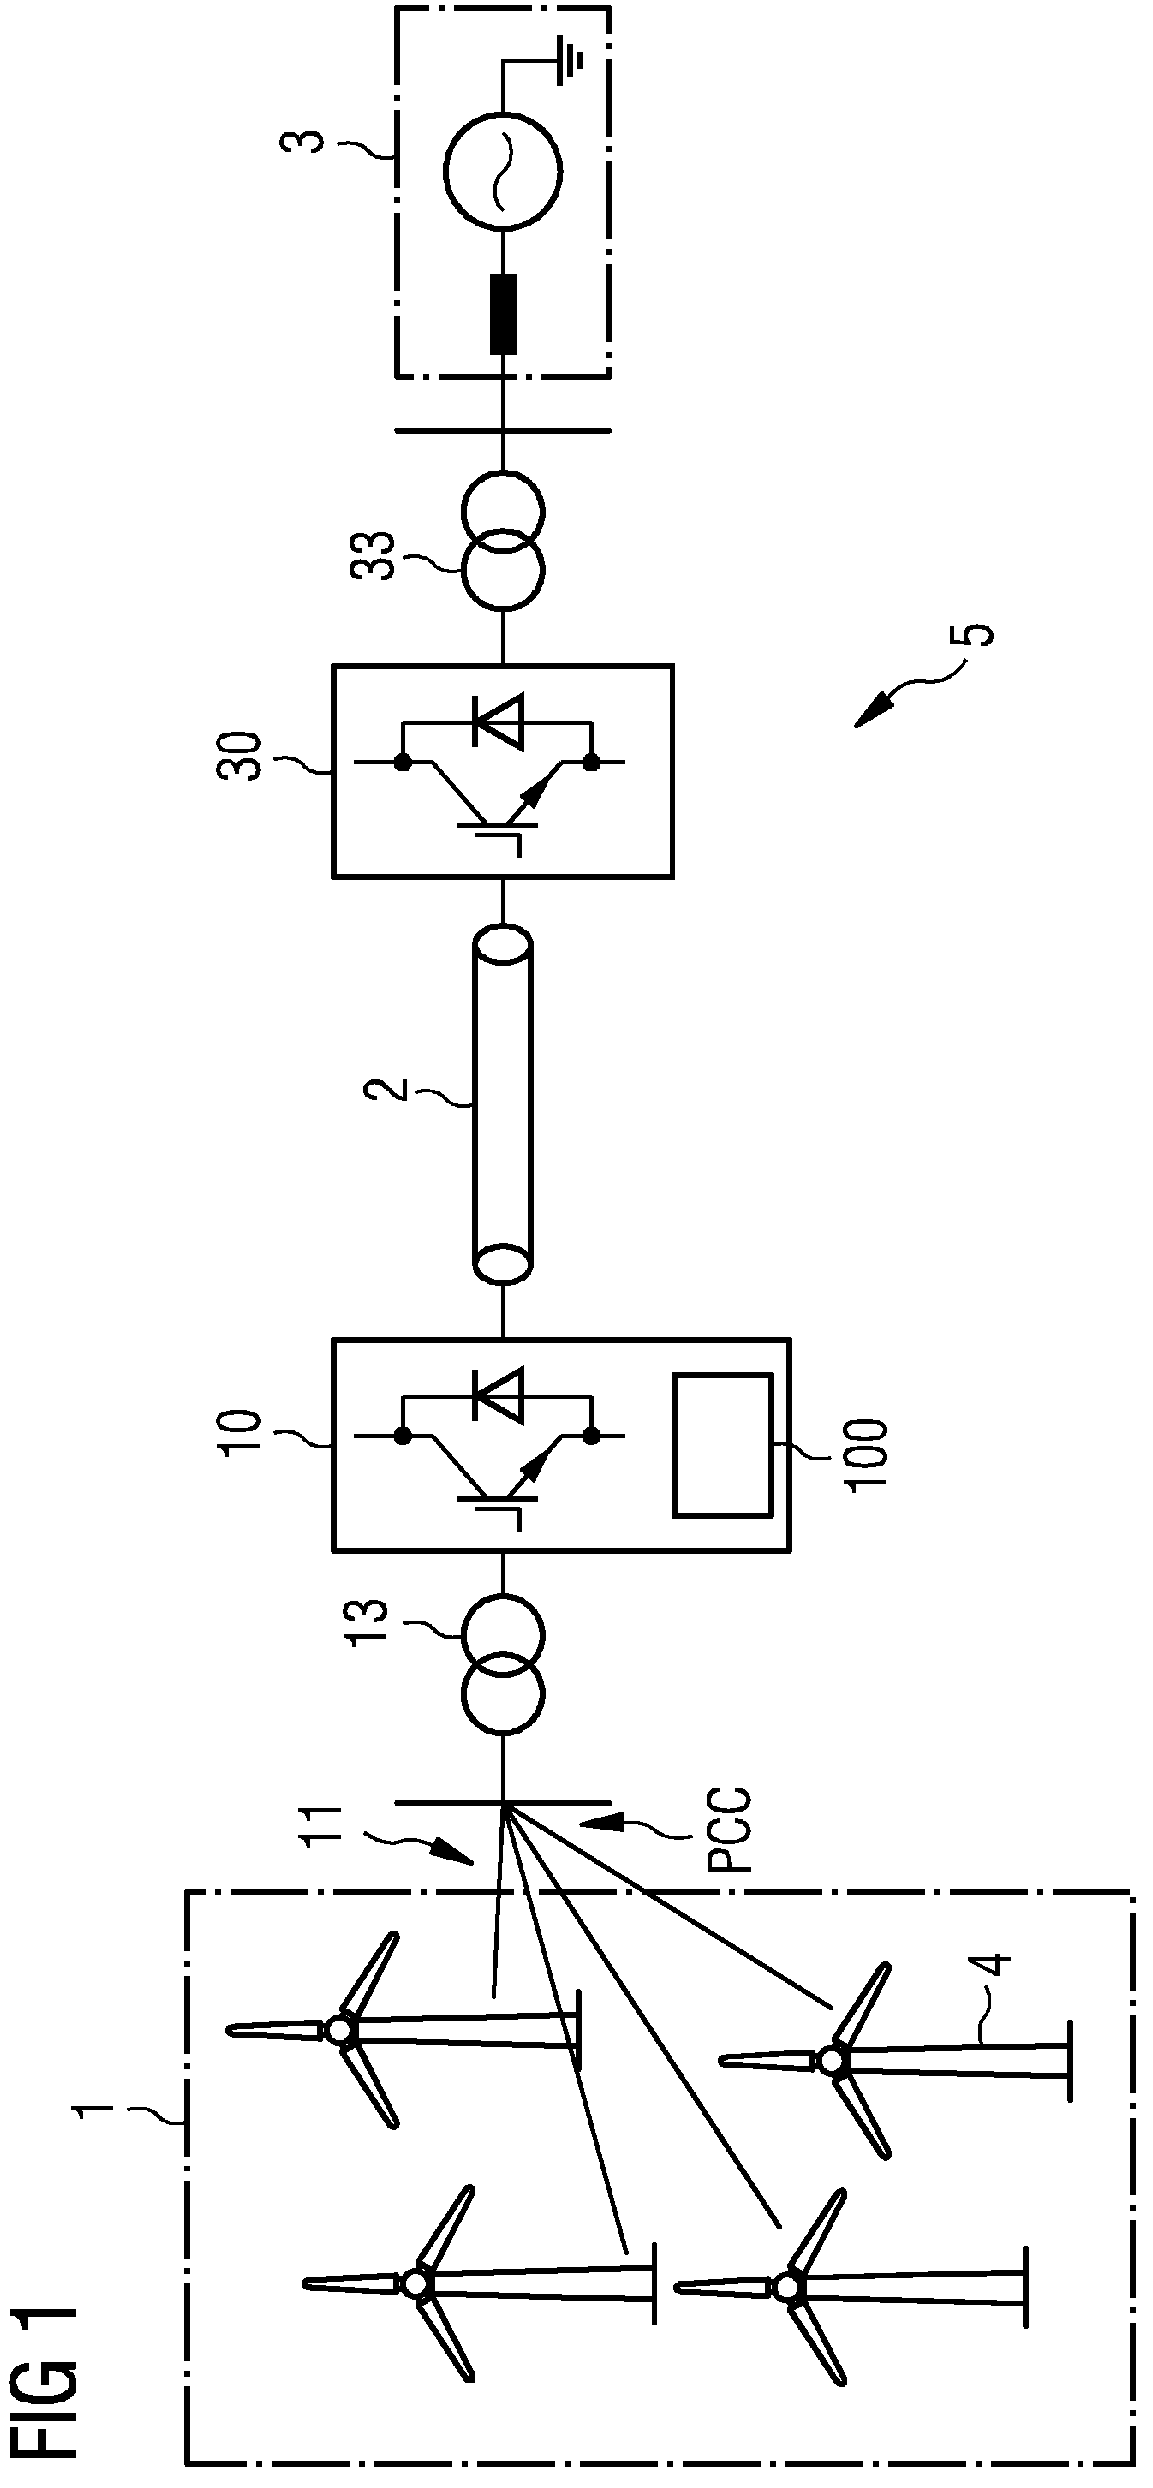 Method of controlling the power input to a HVDC transmission link